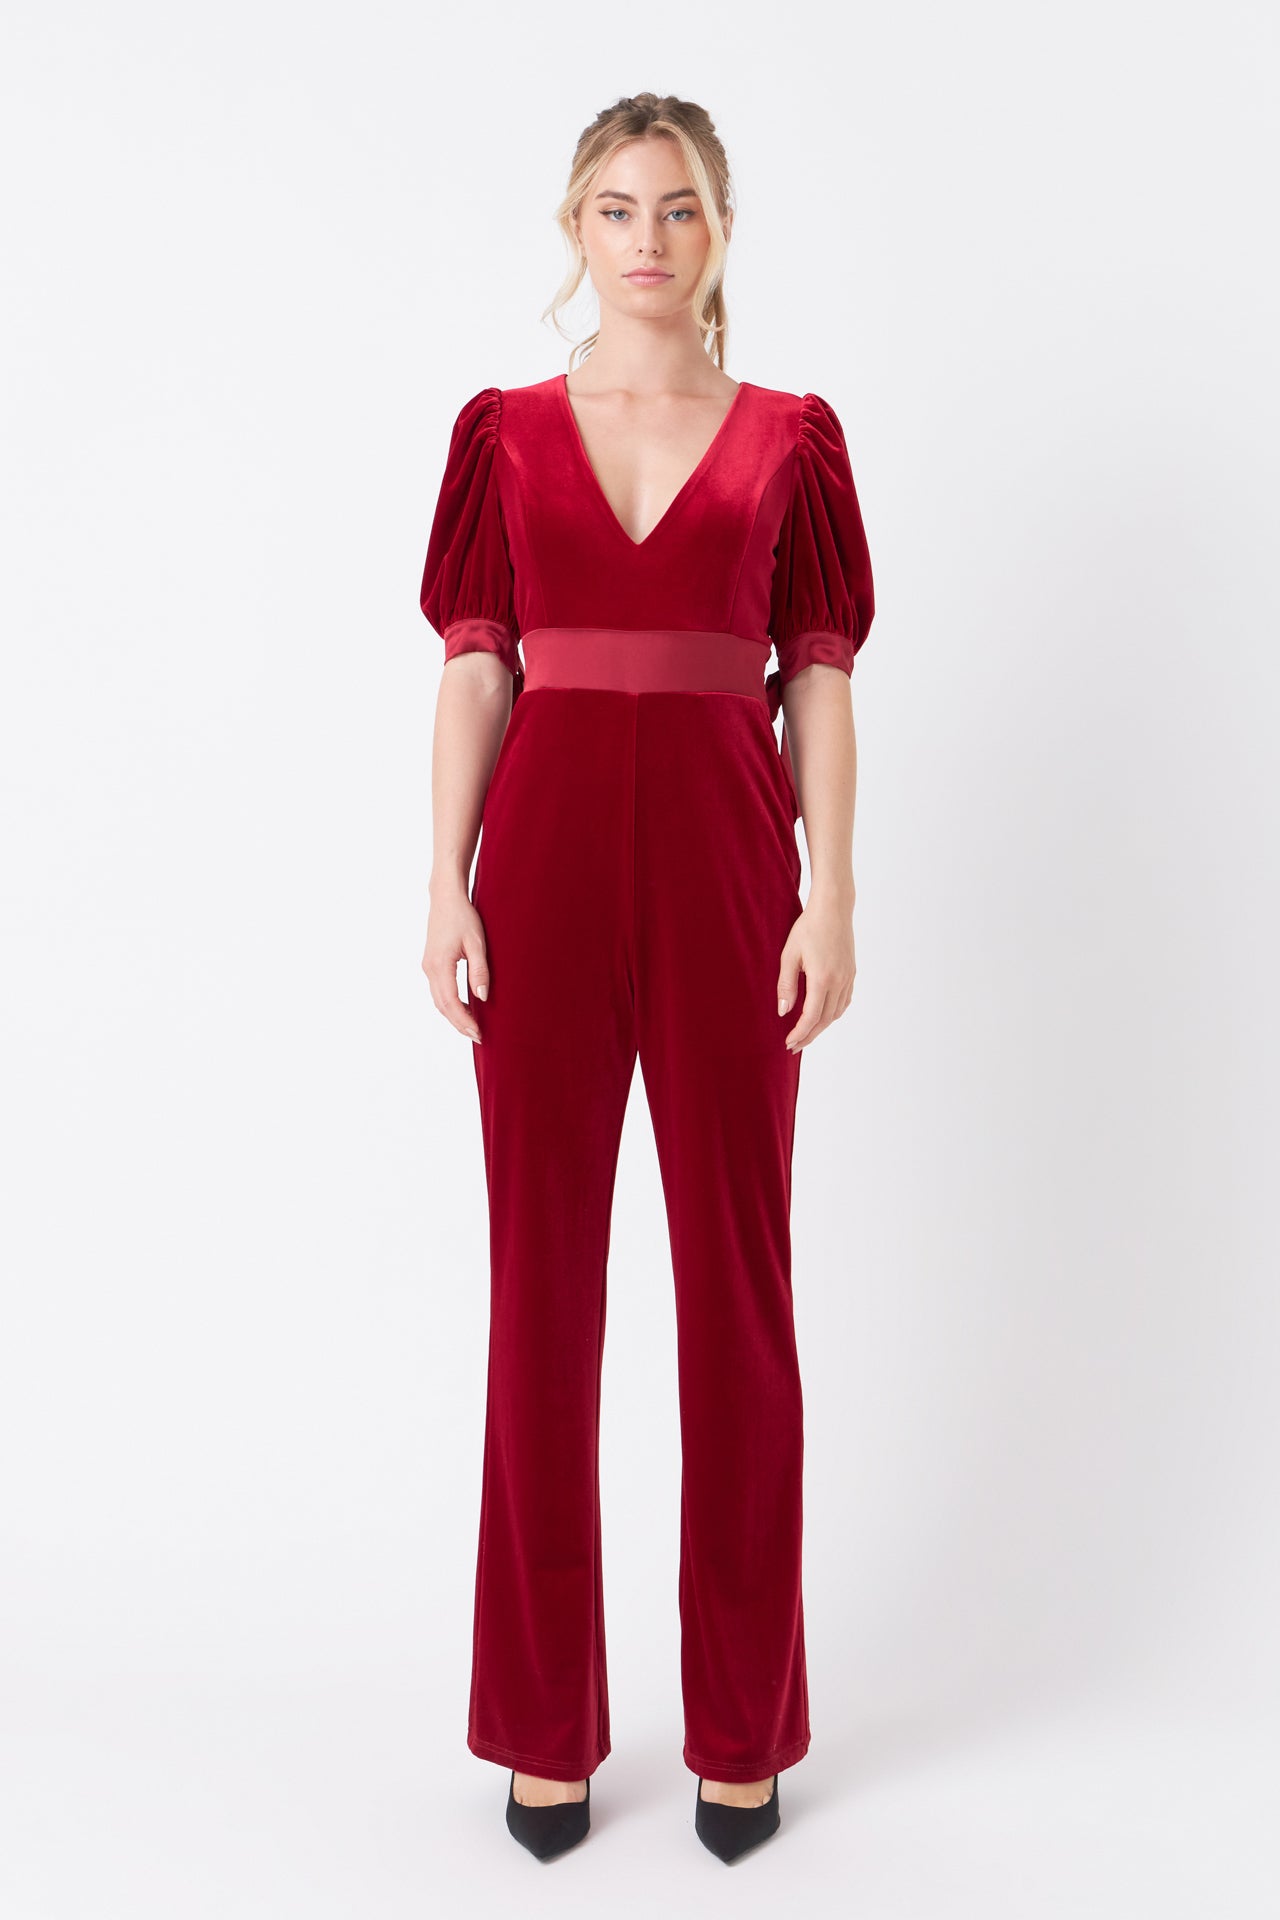 Endless Rose - Bow Tie Sleeve Velvet Jumpsuit - Jumpsuits in Women's Clothing available at endlessrose.com